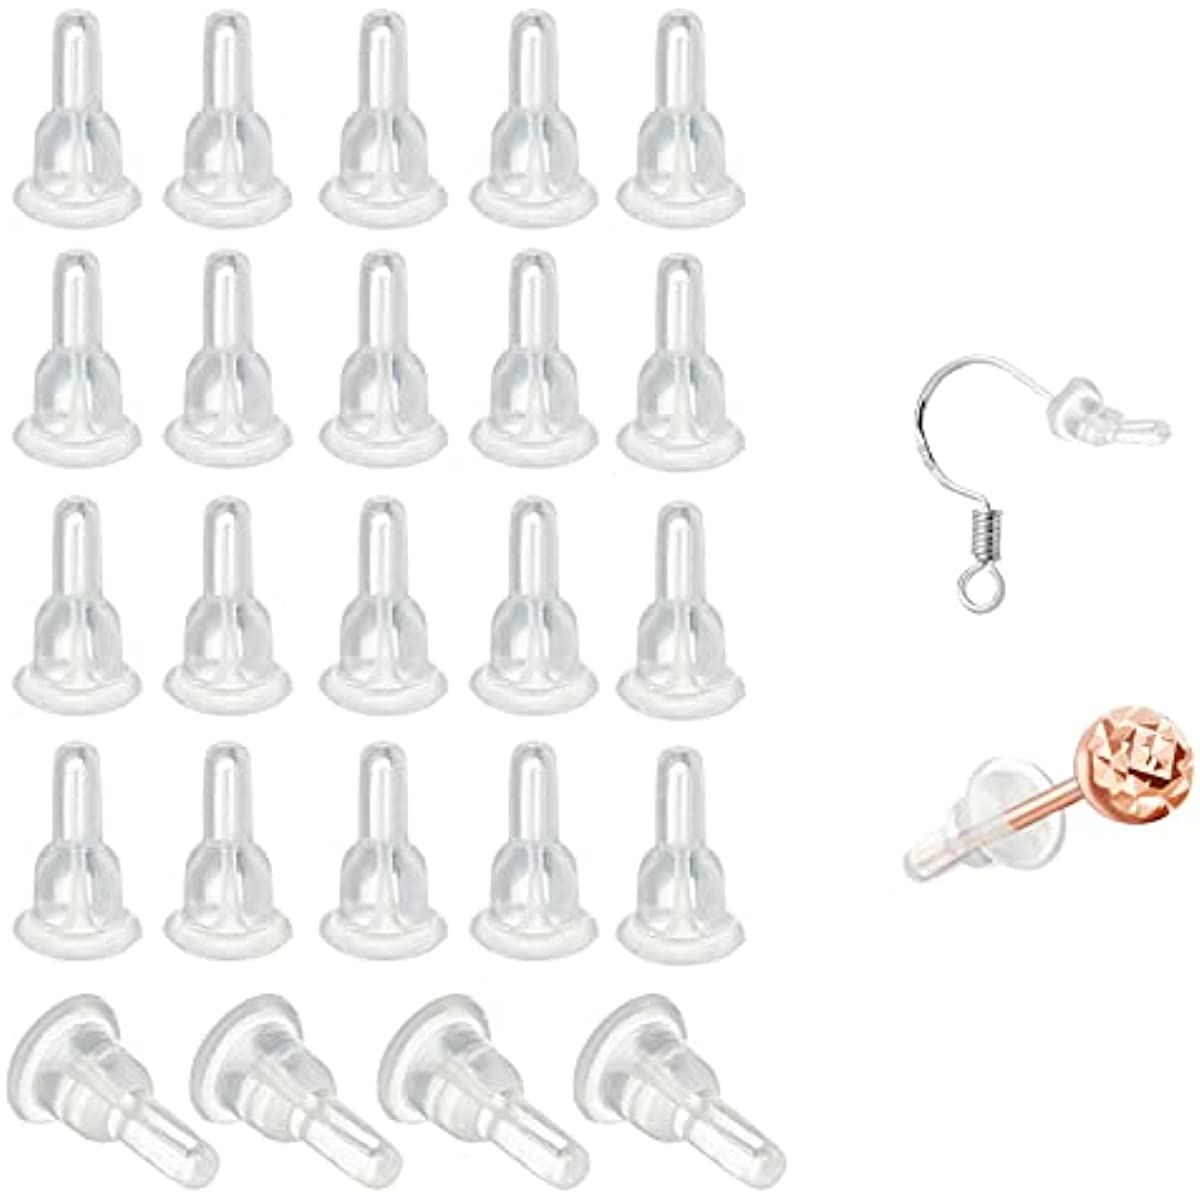 100 Pcs Clear Silicone Earring Backs Hypoallergenic Secure Push-Back  Earring Stoppers for Stud Earrings, 10x6mm Full-Cover Studs